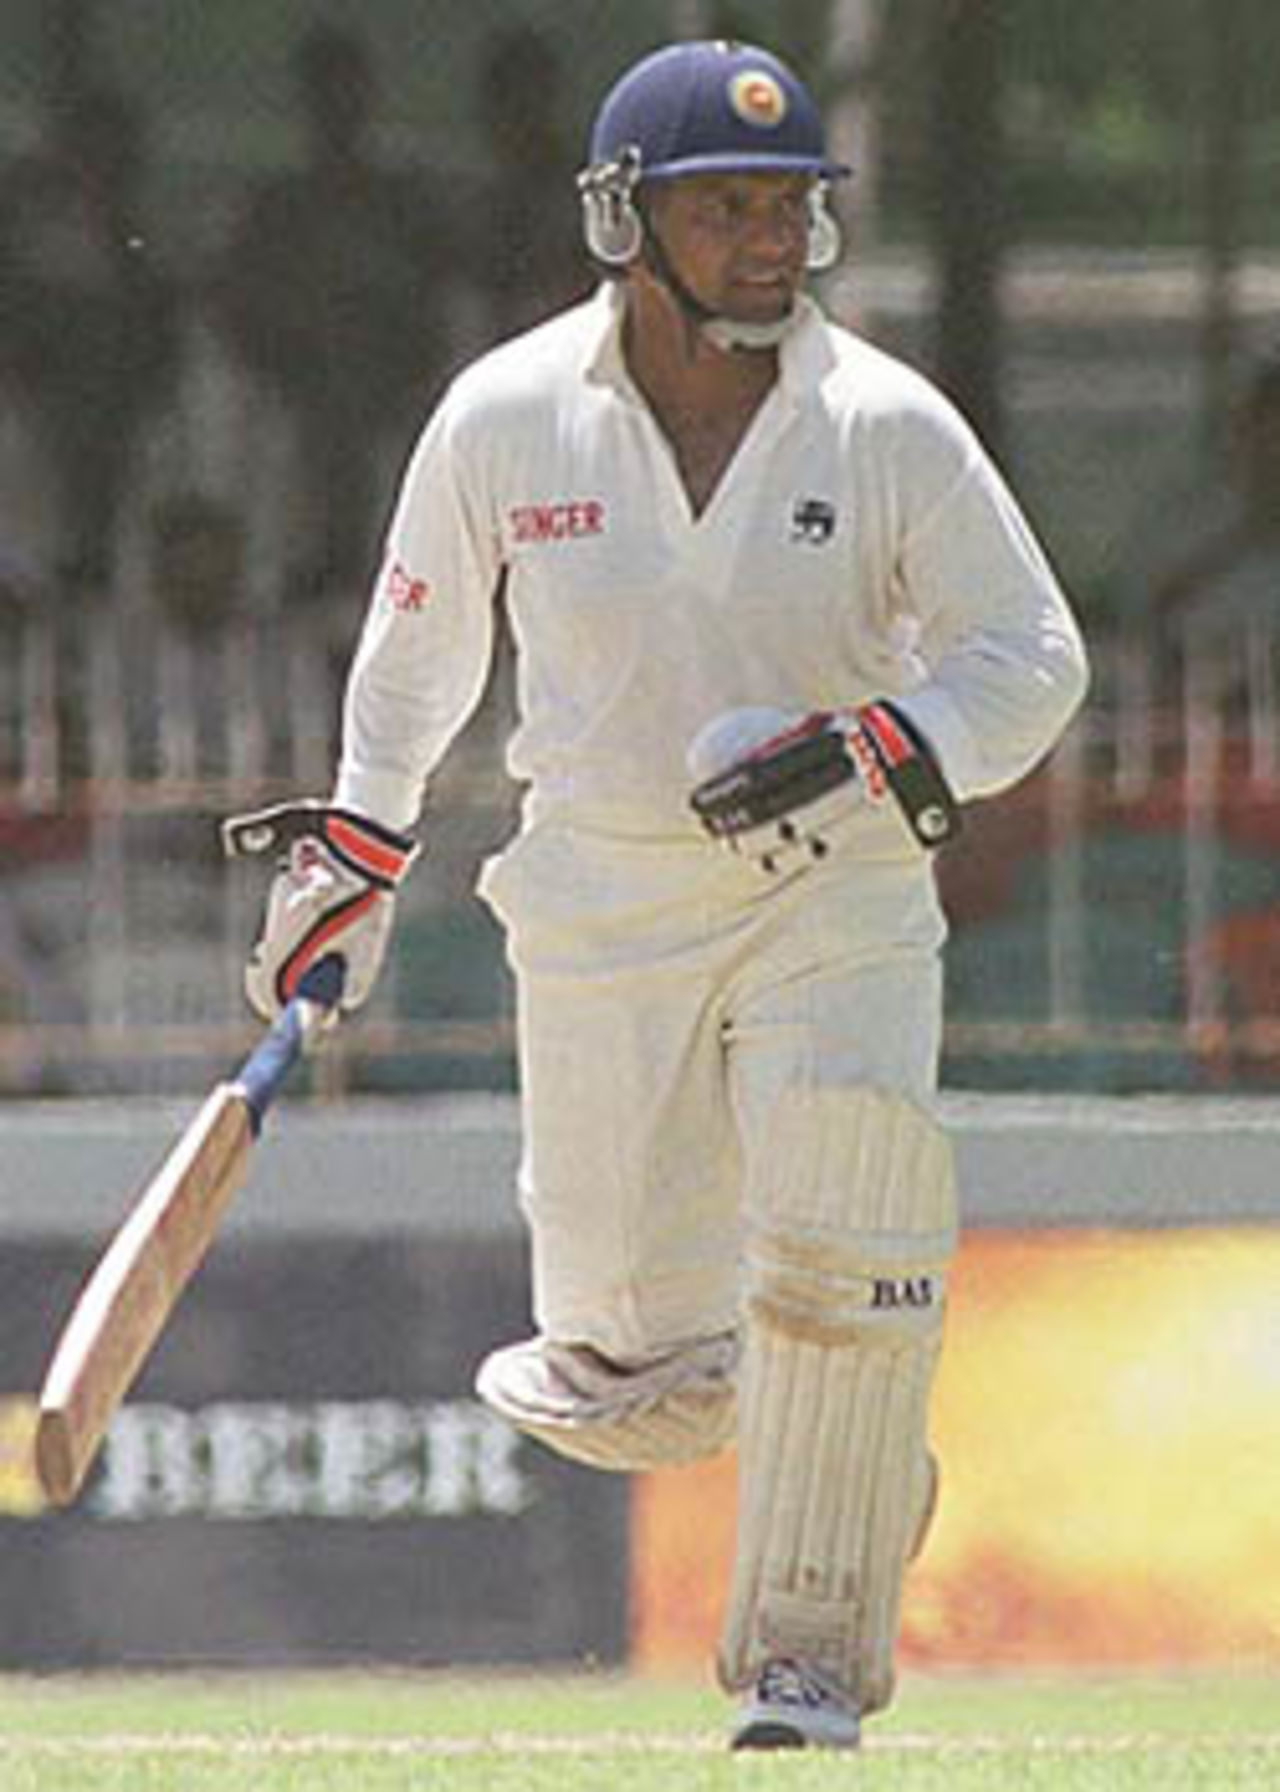 Arjuna Ranatunga sets off for a single, South Africa in Sri Lanka, 2000/01, 3rd Test, Sri Lanka v South Africa, Sinhalese Sports Club Ground, Colombo, 06-10 August 2000 (Day 3).